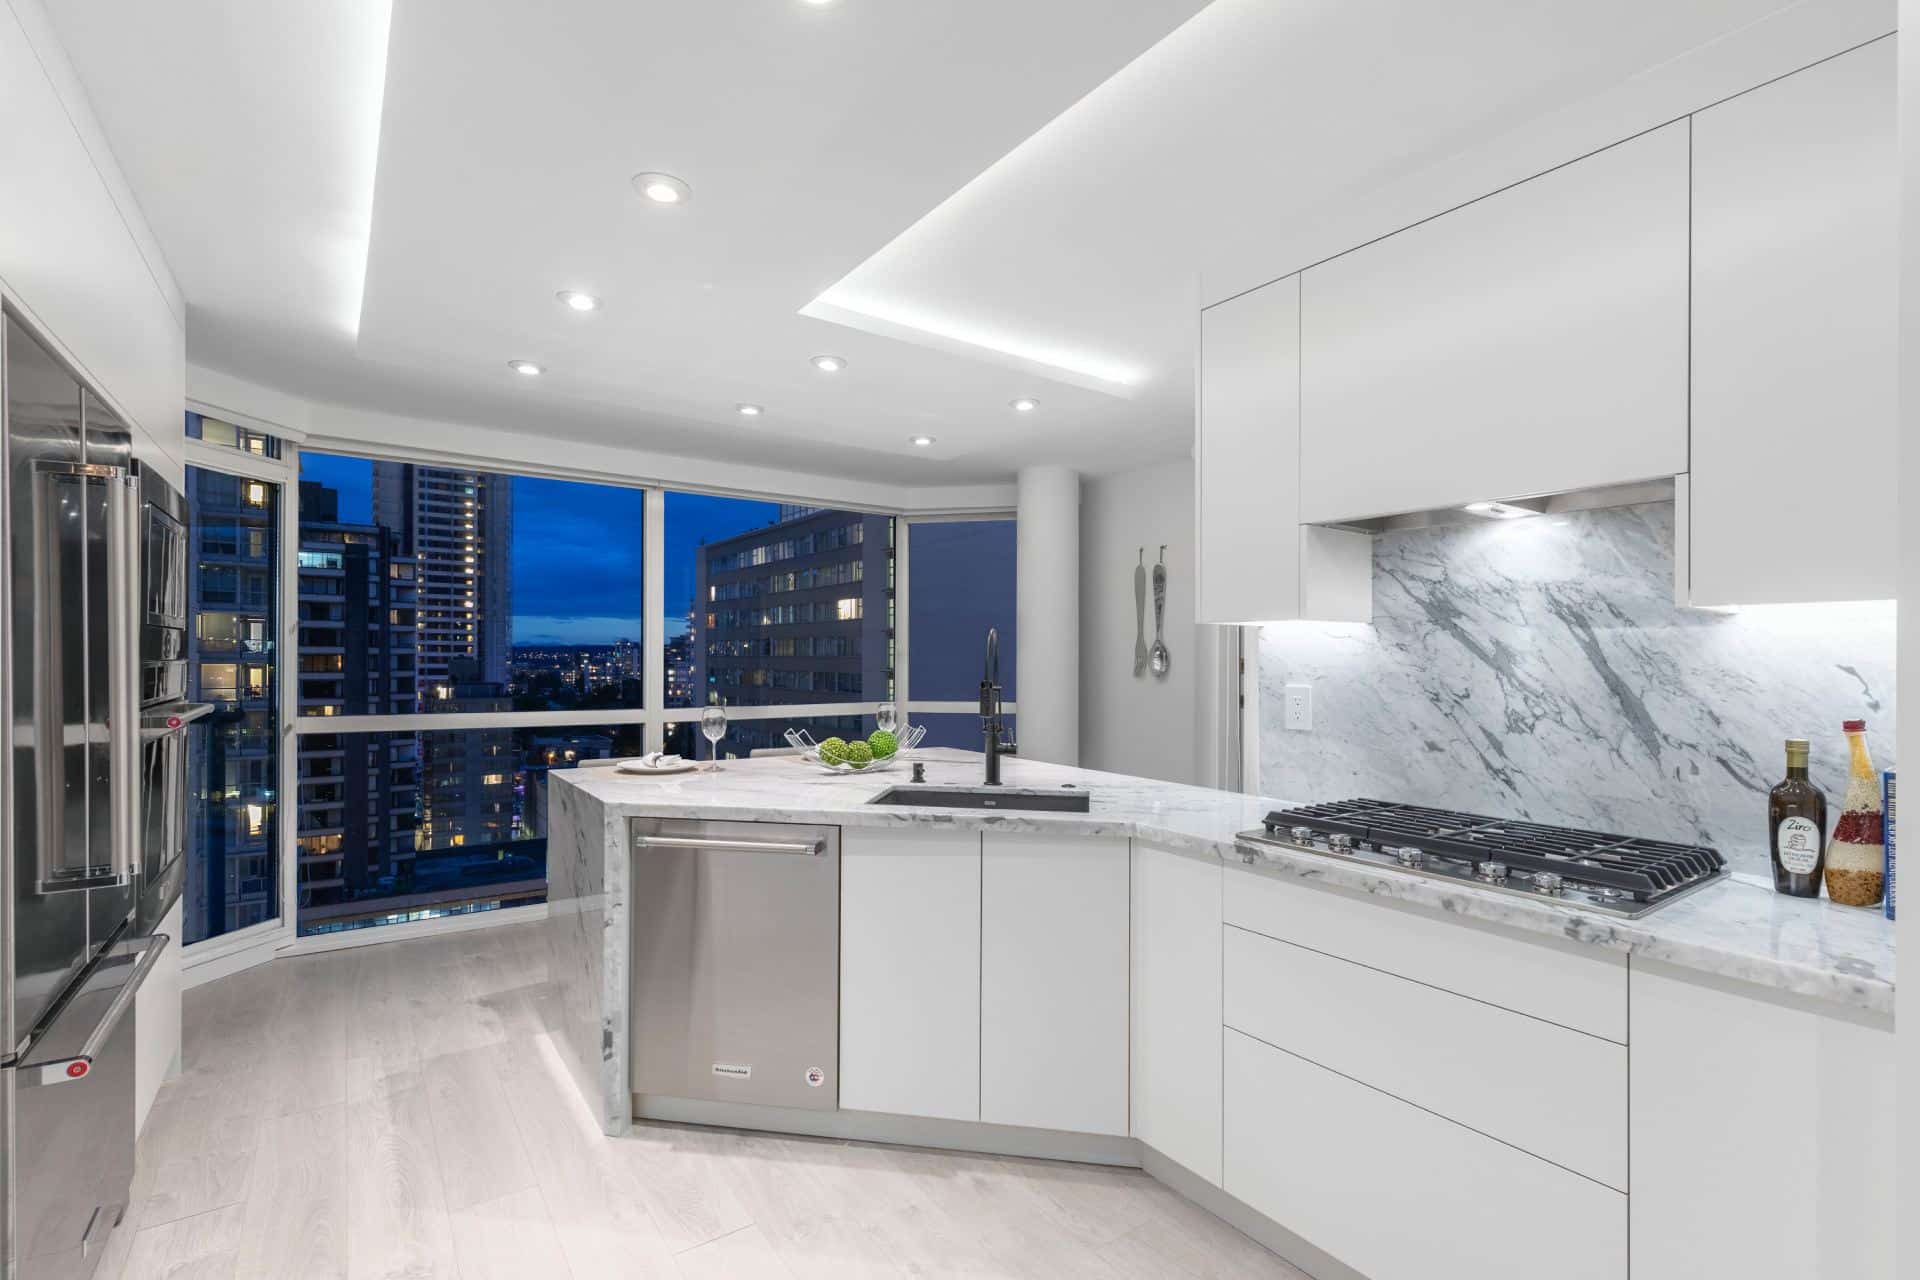 modern-white-kitchen-renovation-vancouver-marble-countertop-black-faucet-sink-custom-ceiling-lighting-dropped